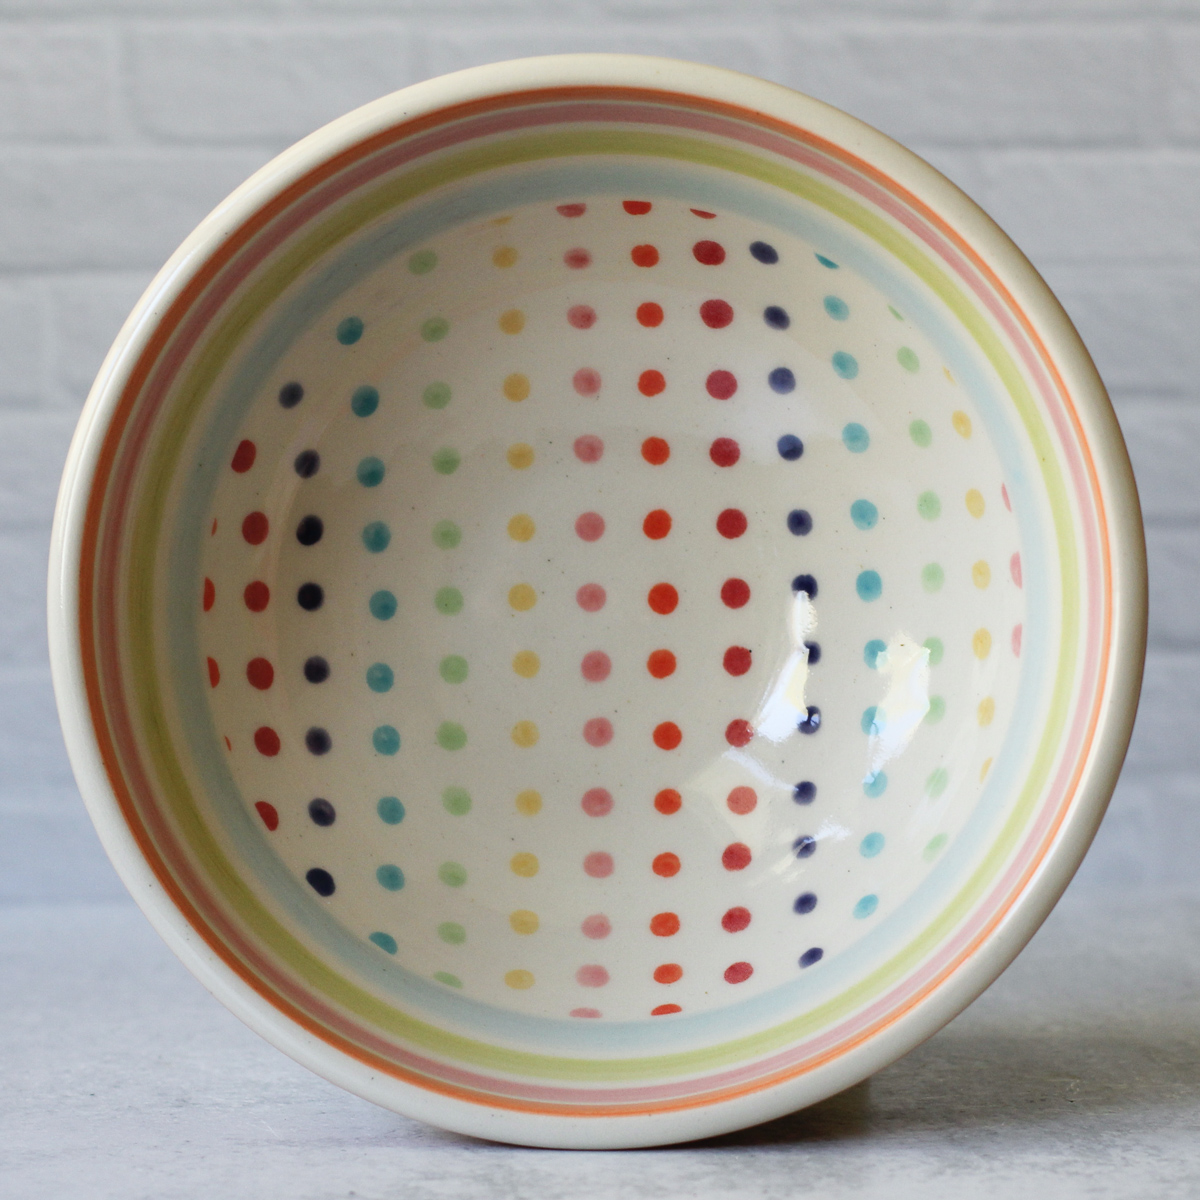 Candy Dot Serving Bowl, 9-inch